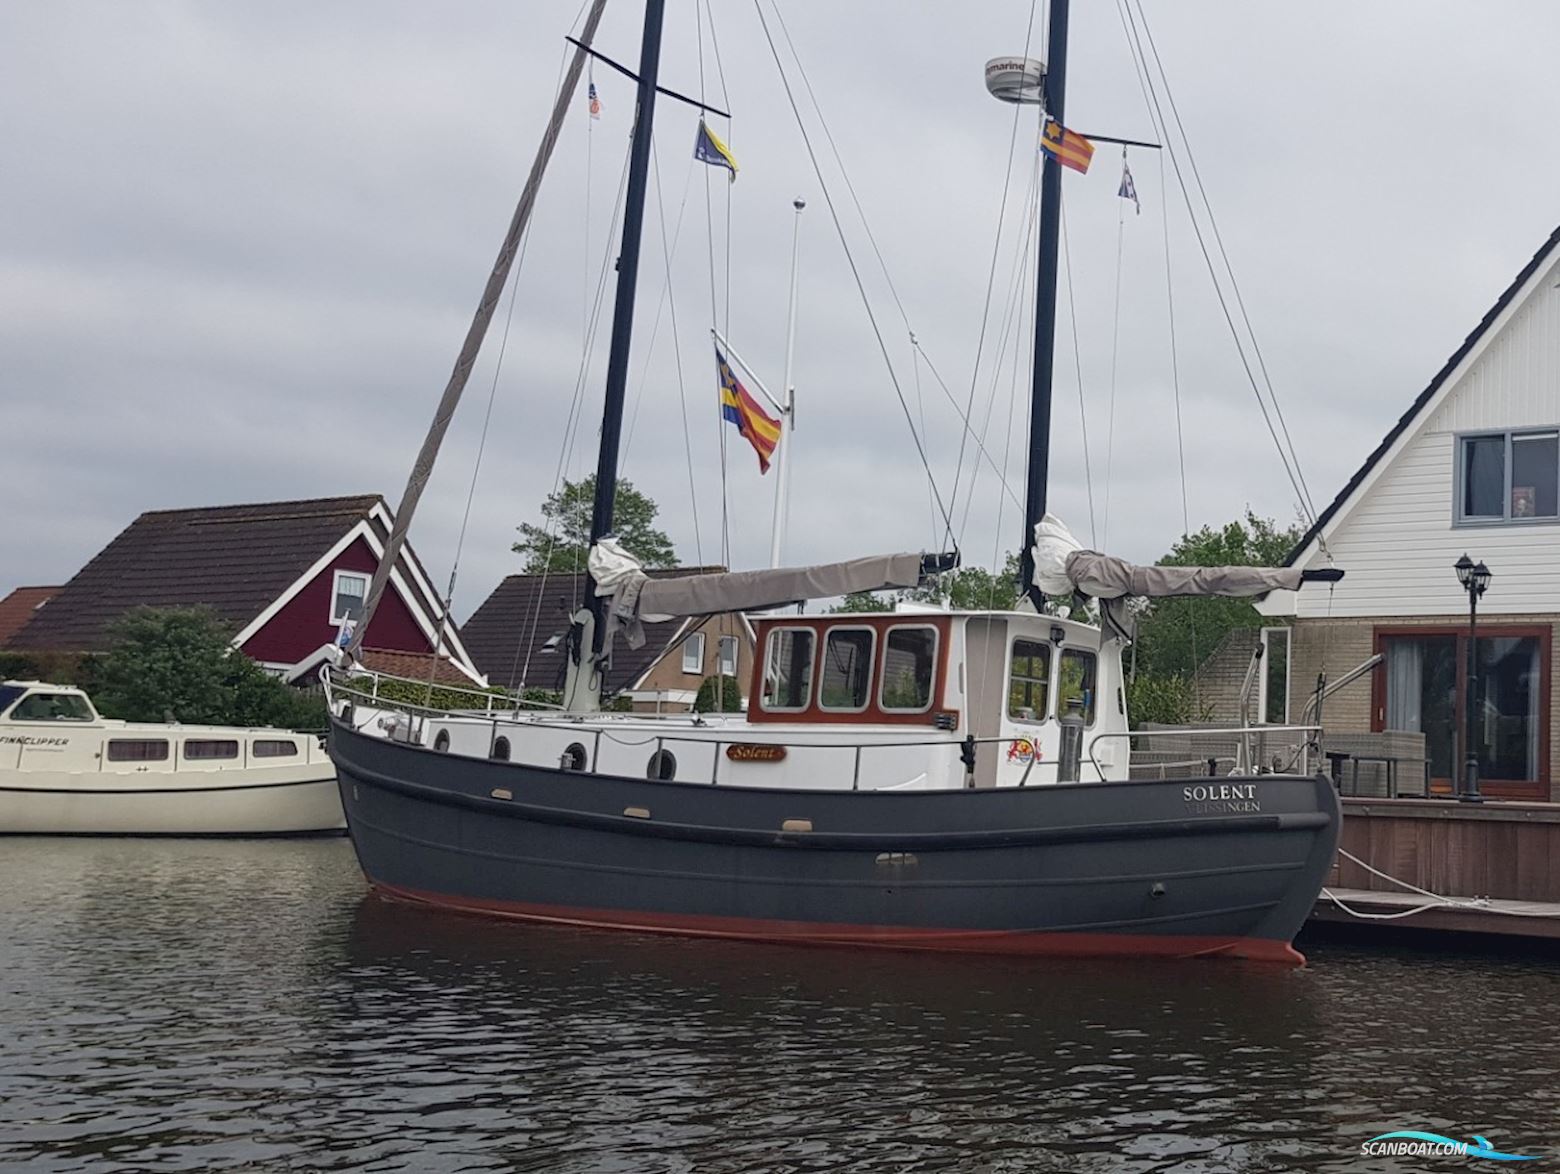 Speelmanskotter 1100 Sailing boat 1991, with Ford engine, The Netherlands